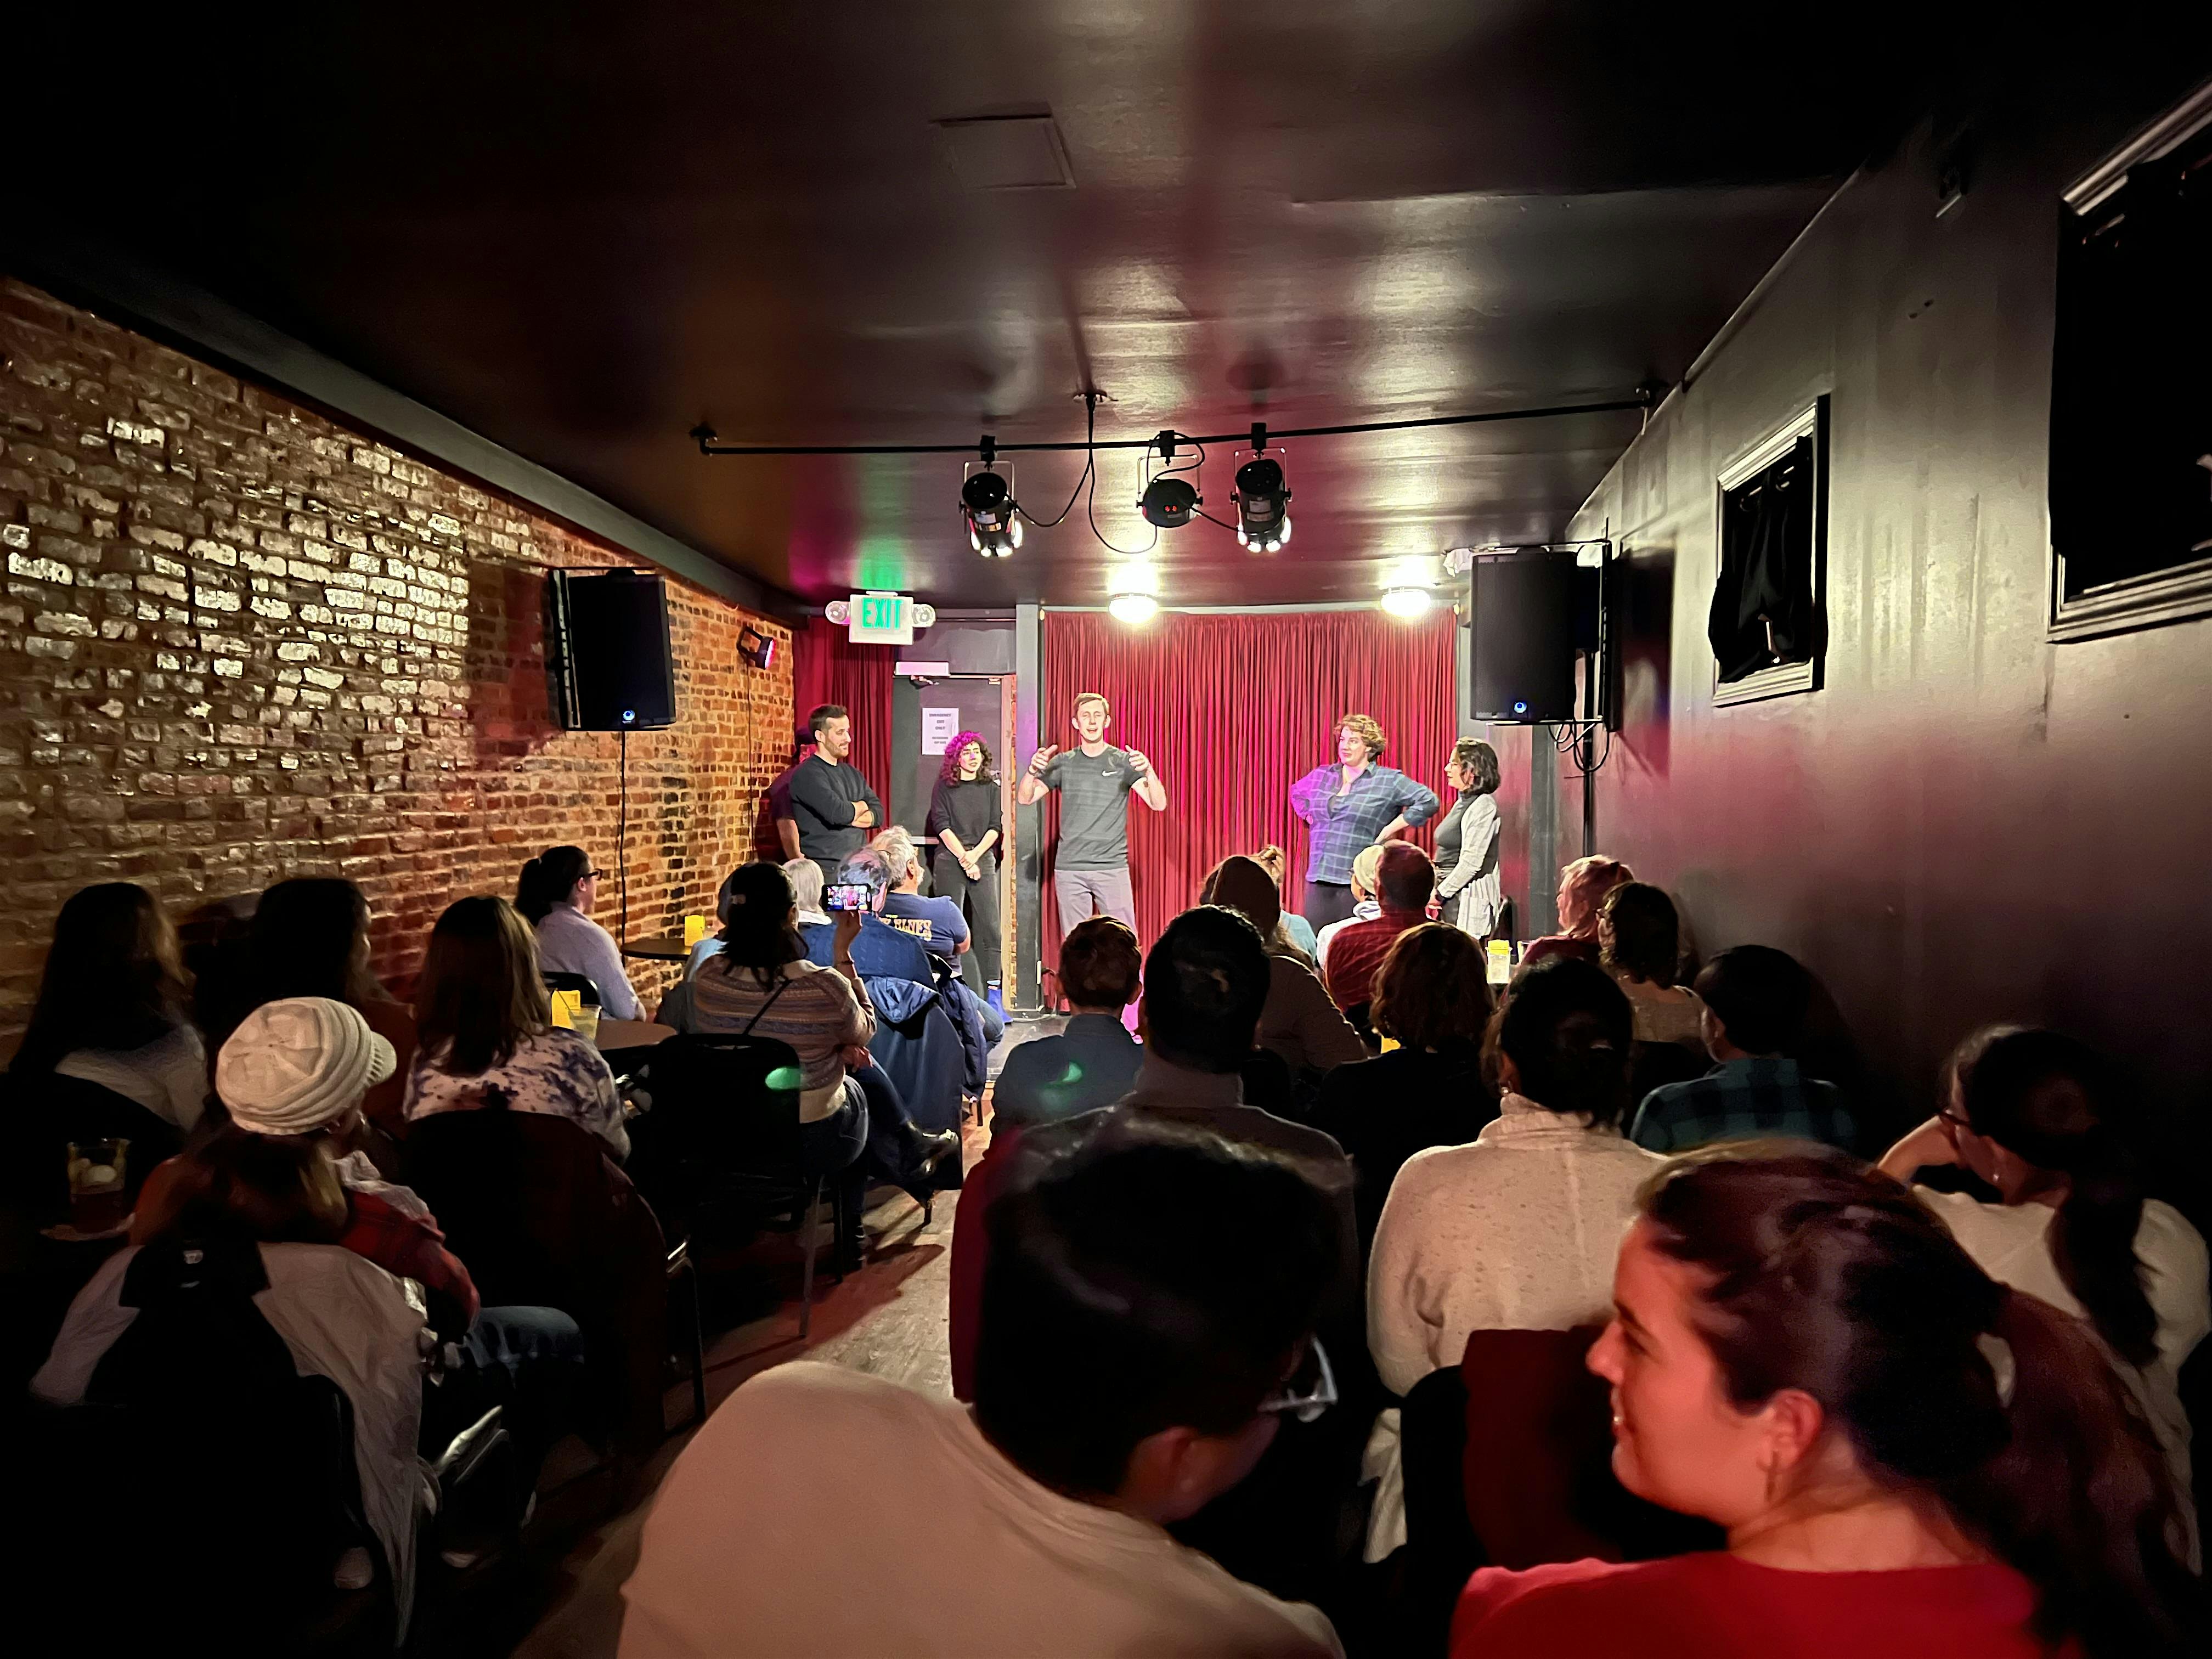 Highwire Improv at The Lou Costello Room